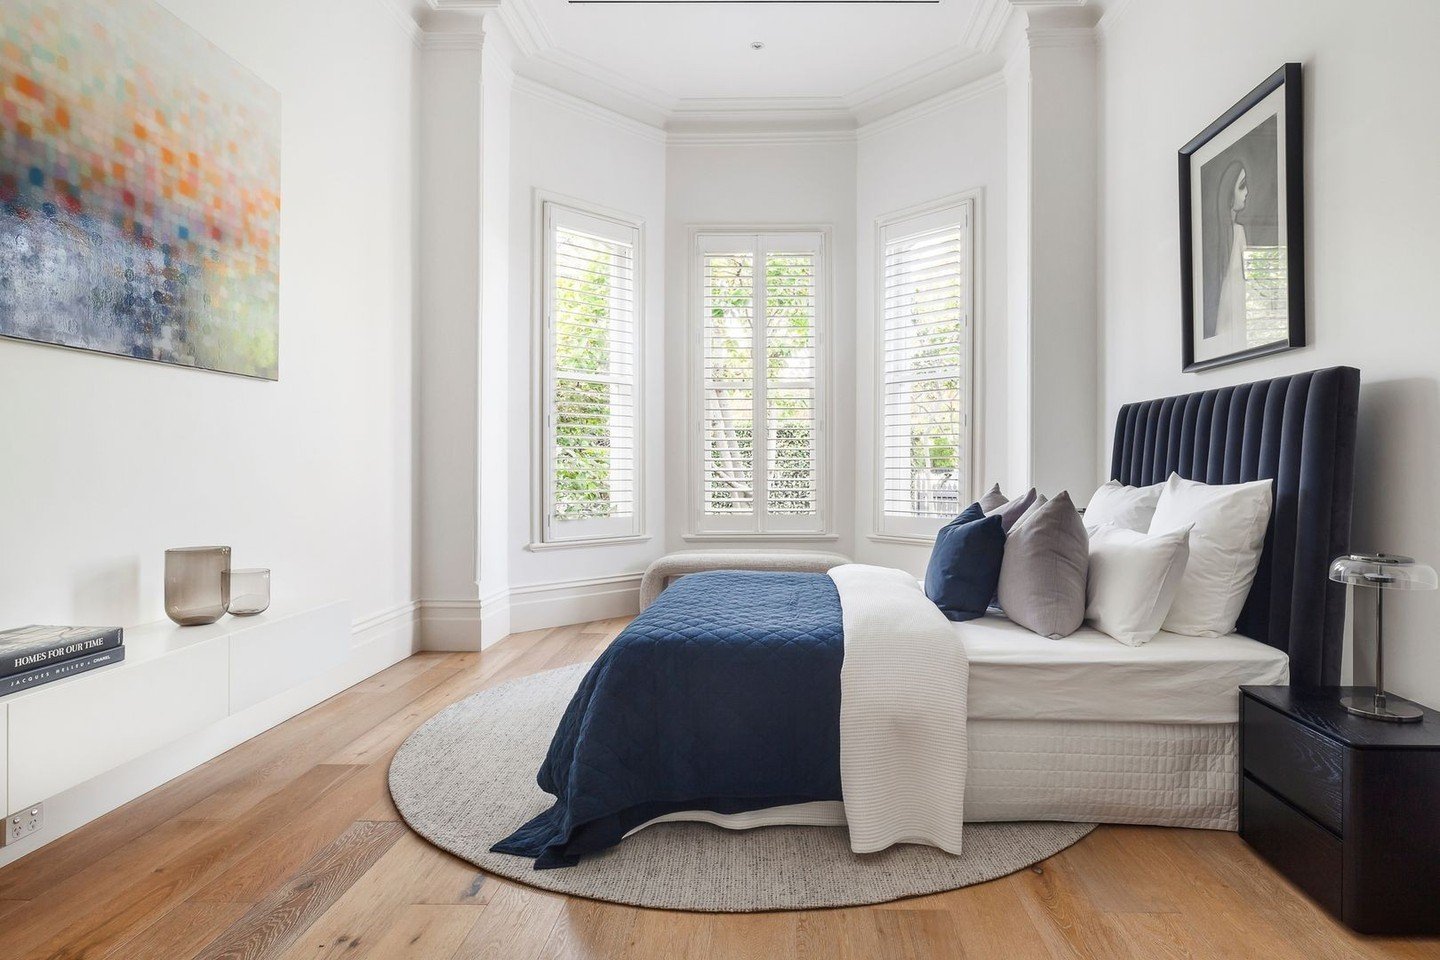 Style Notes | A round rug adds an unexpected element to this beautiful guest bedroom, mirroring the curve of the bay window and creating a focal point. ⁠
⁠
Styling | @cooperrobinsoninteriors⁠
Stylists | @khaseem.stylist @stef_spp⁠
⁠
_______________⁠
